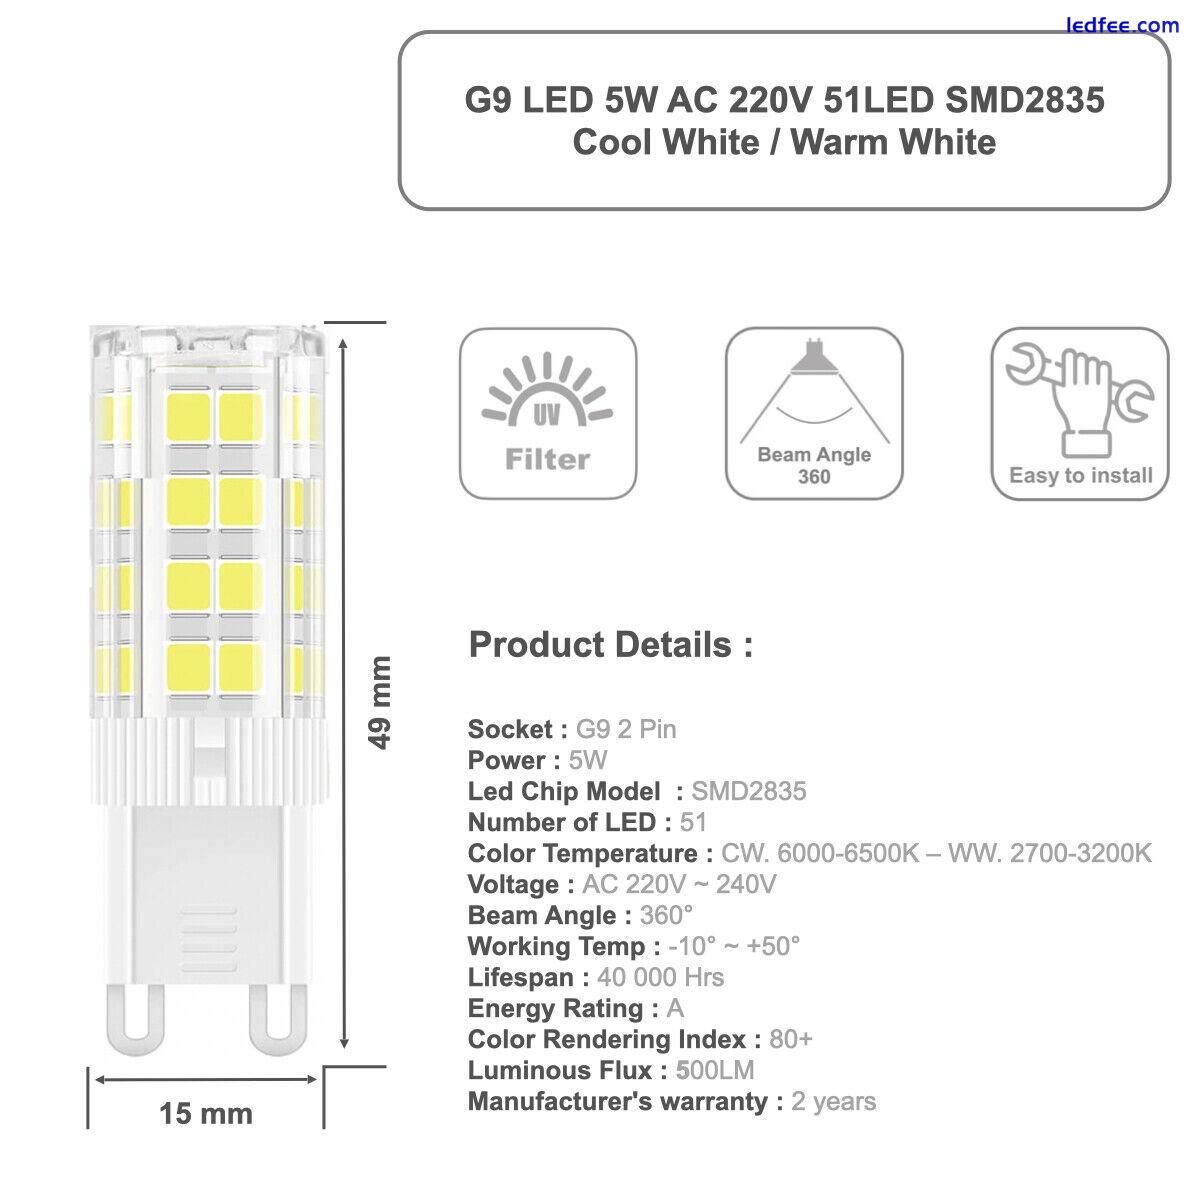 LED Light Bulbs G9 3W | 5W SMD2835 Replacement For G9 Halogen Capsule Bulbs 2 